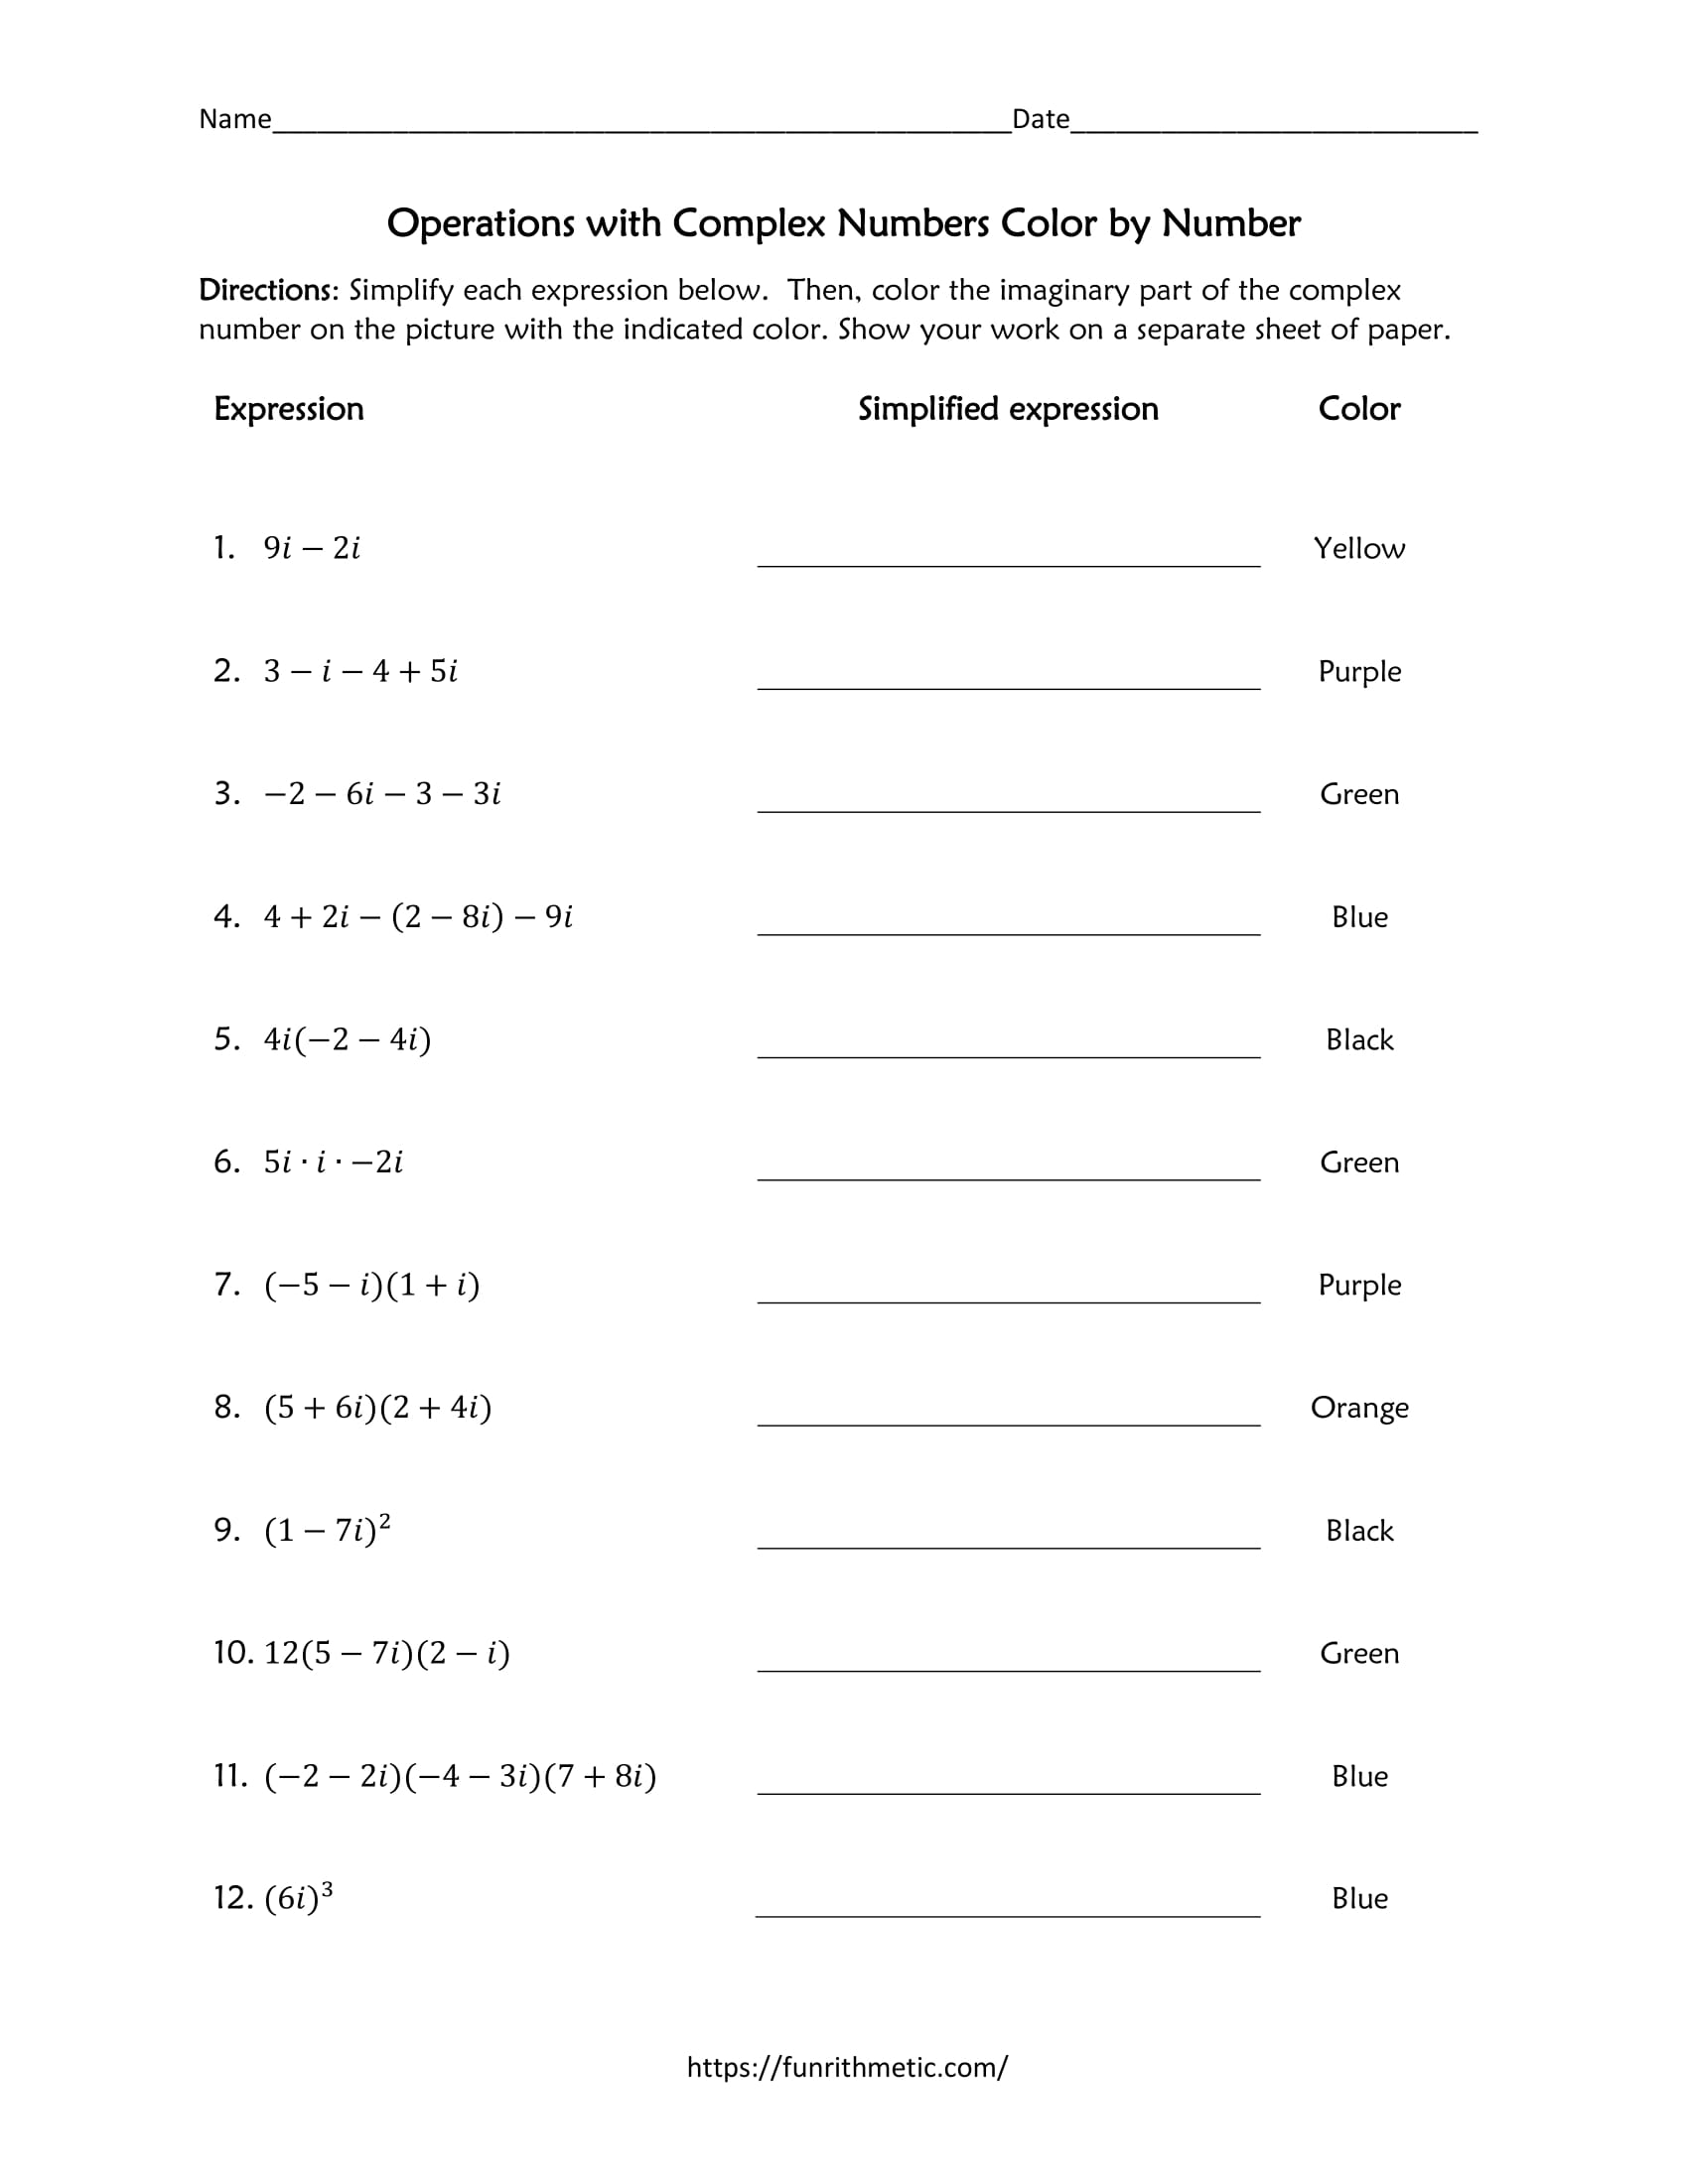 Operations with Complex Numbers Color by Number Throughout Complex Numbers Worksheet Answers